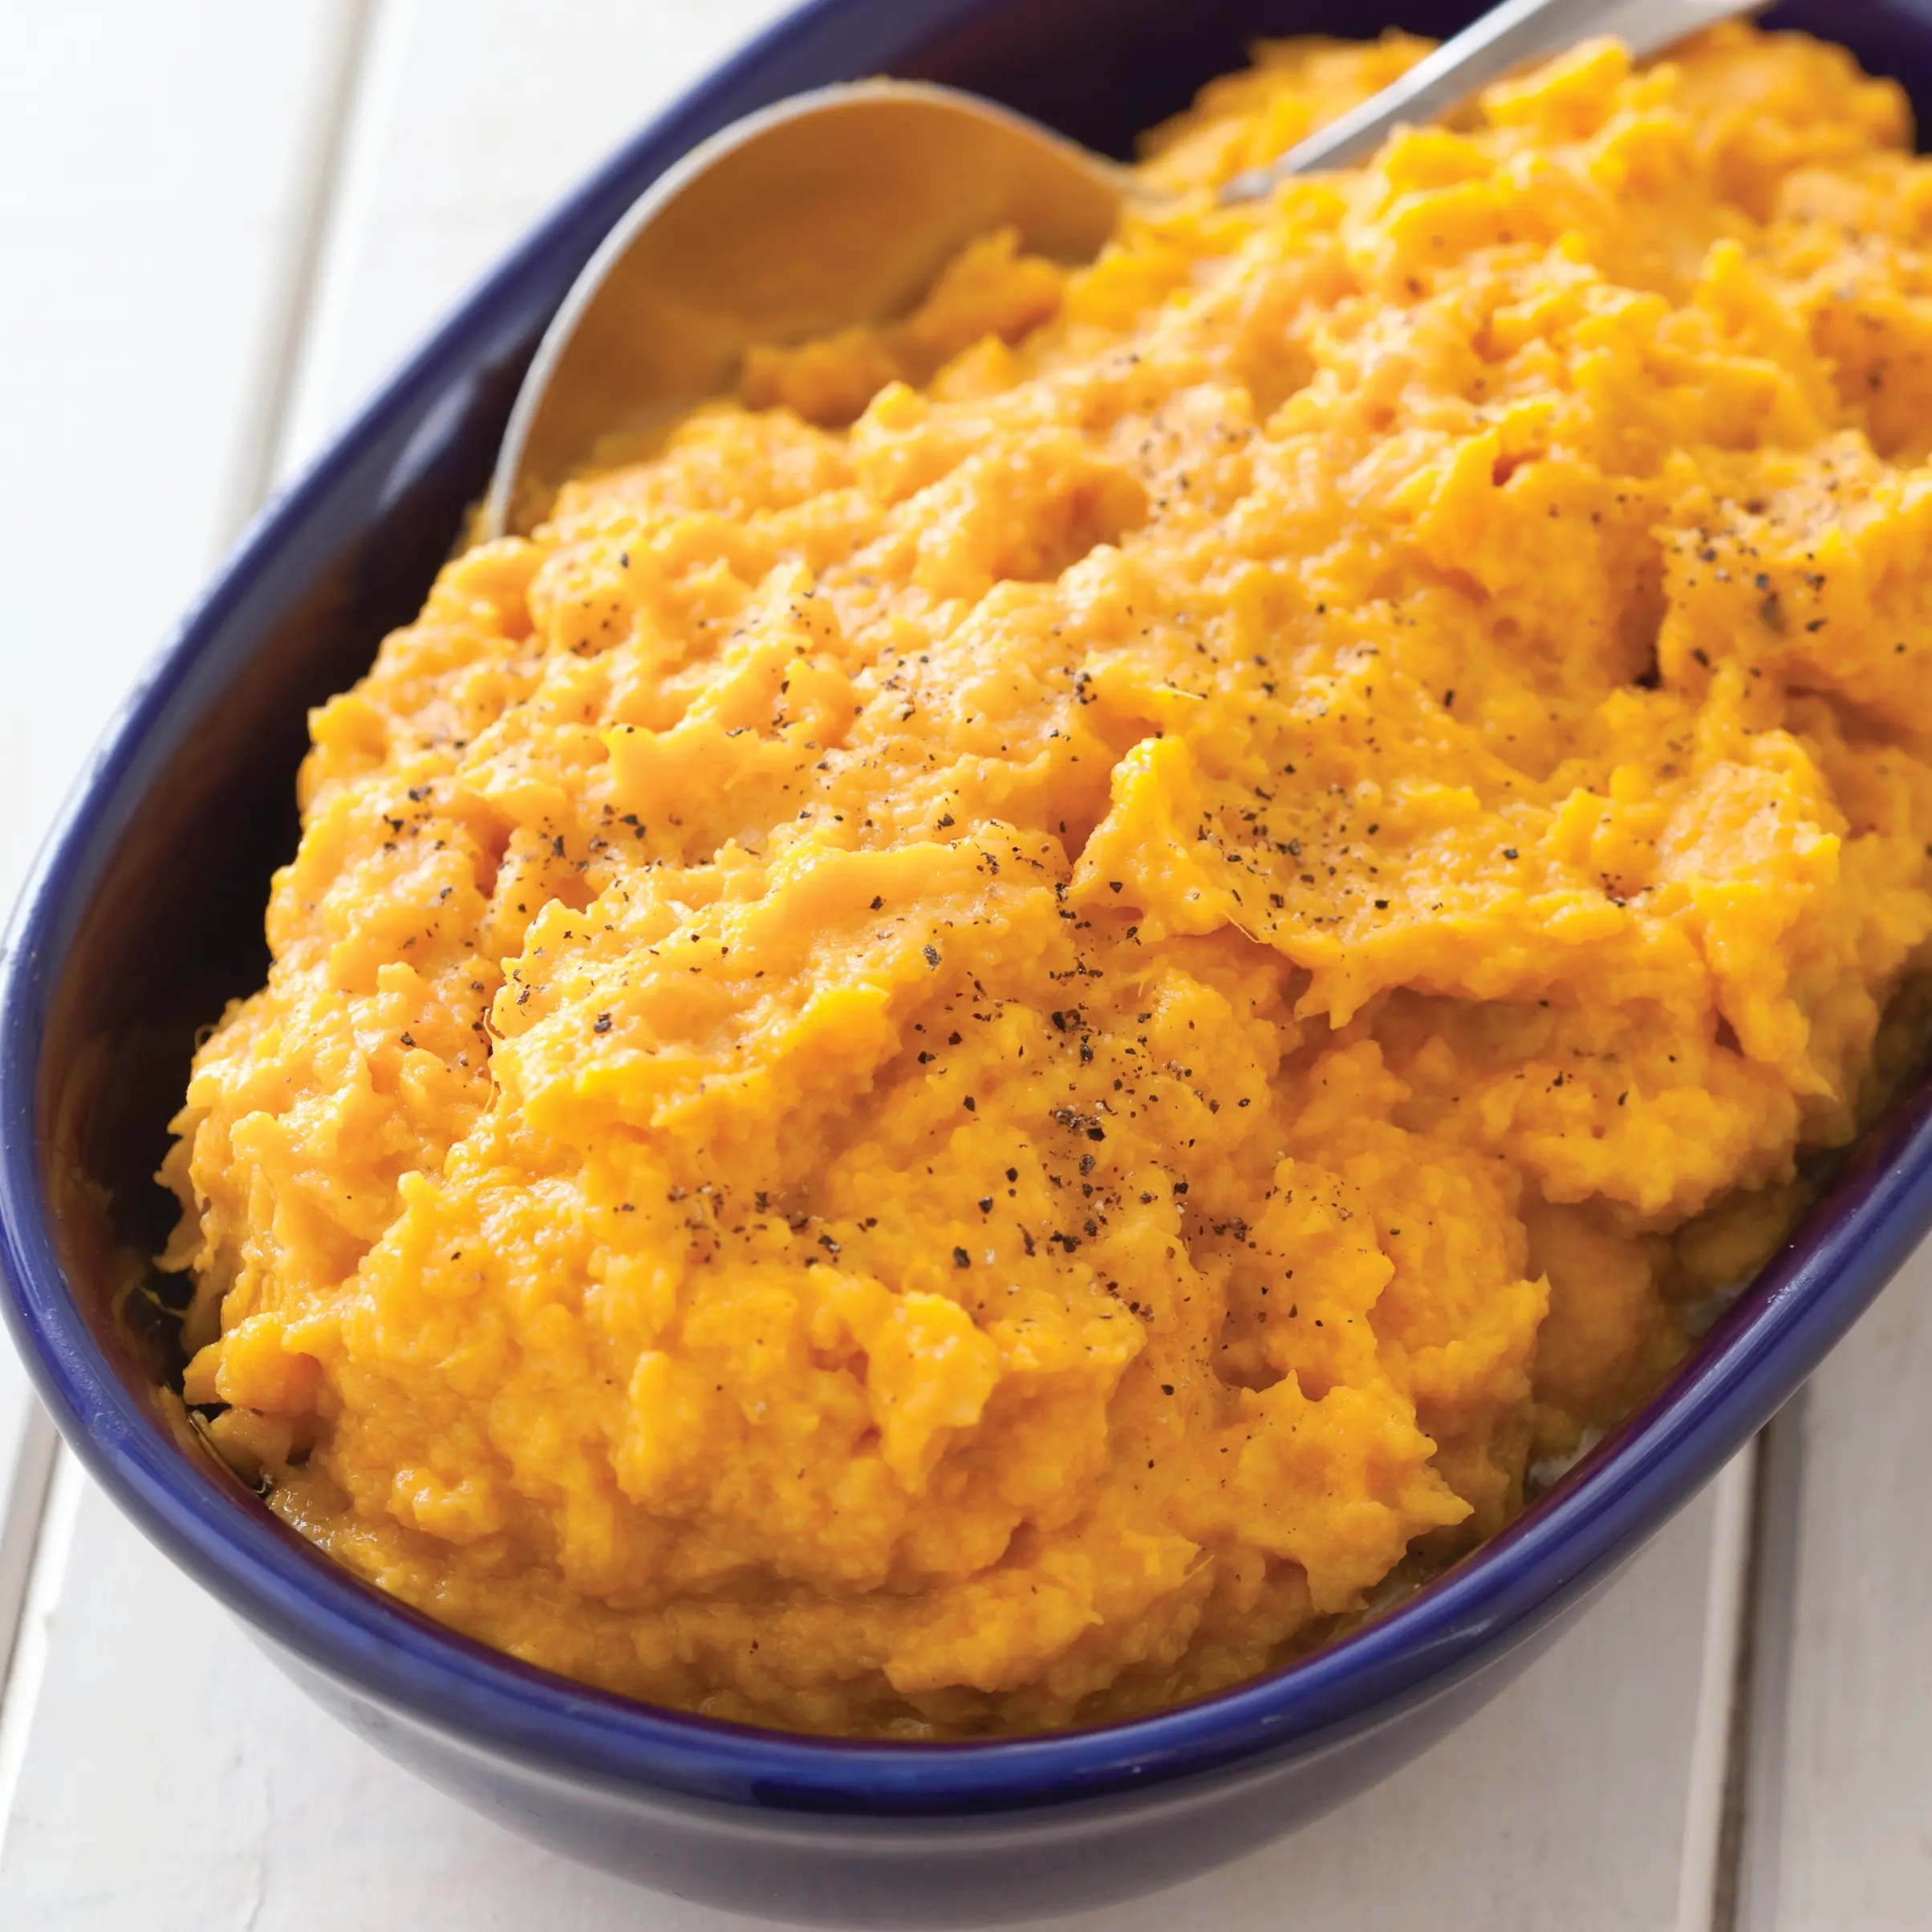 smoked mashed sweet potatoes - What causes stringy mashed sweet potatoes